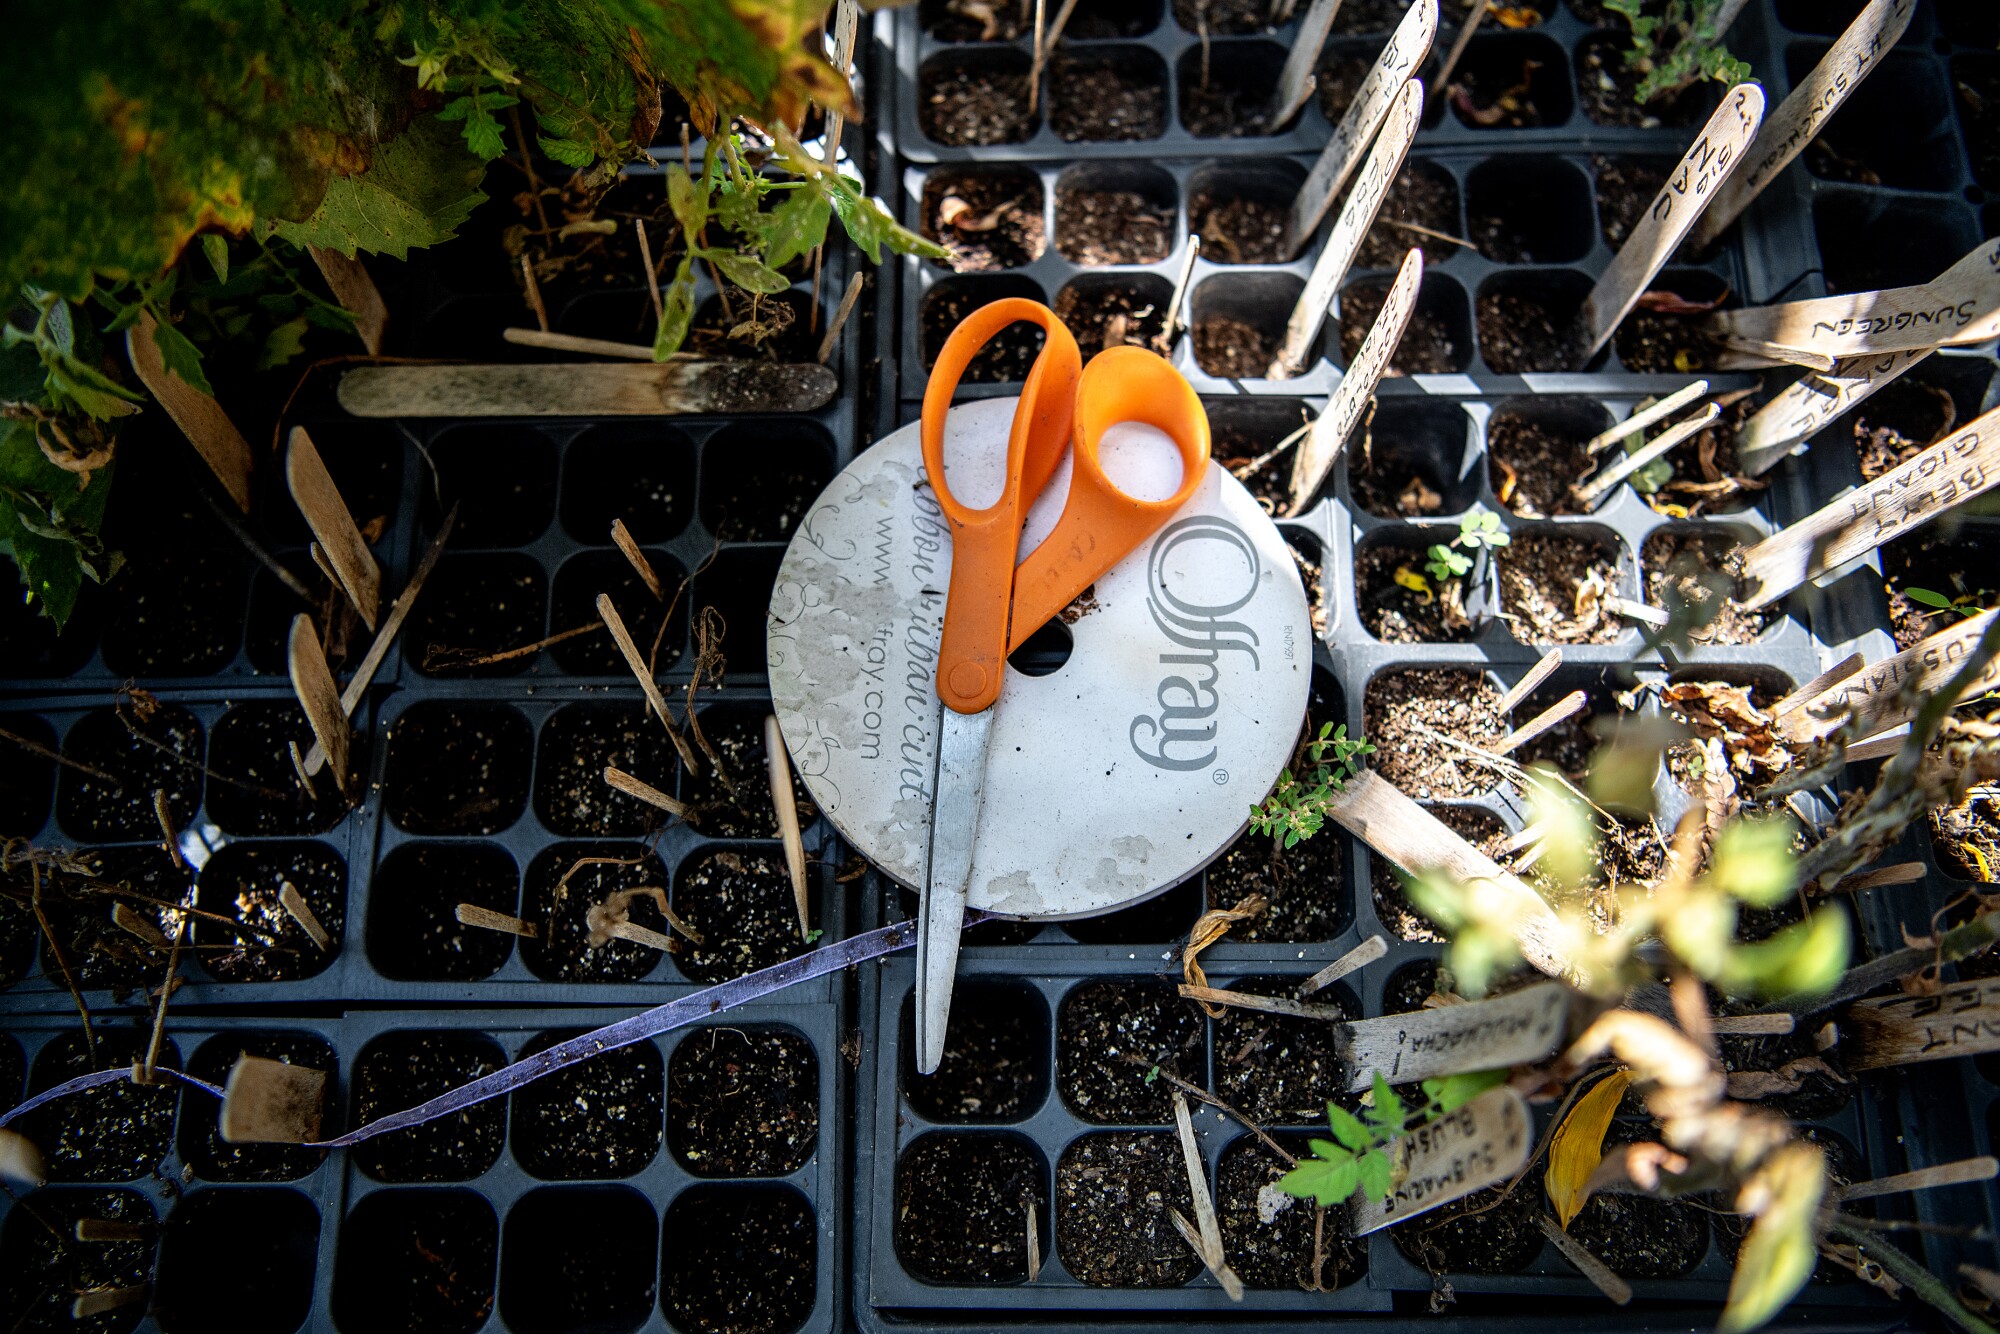 A pair of scissors sits among plants